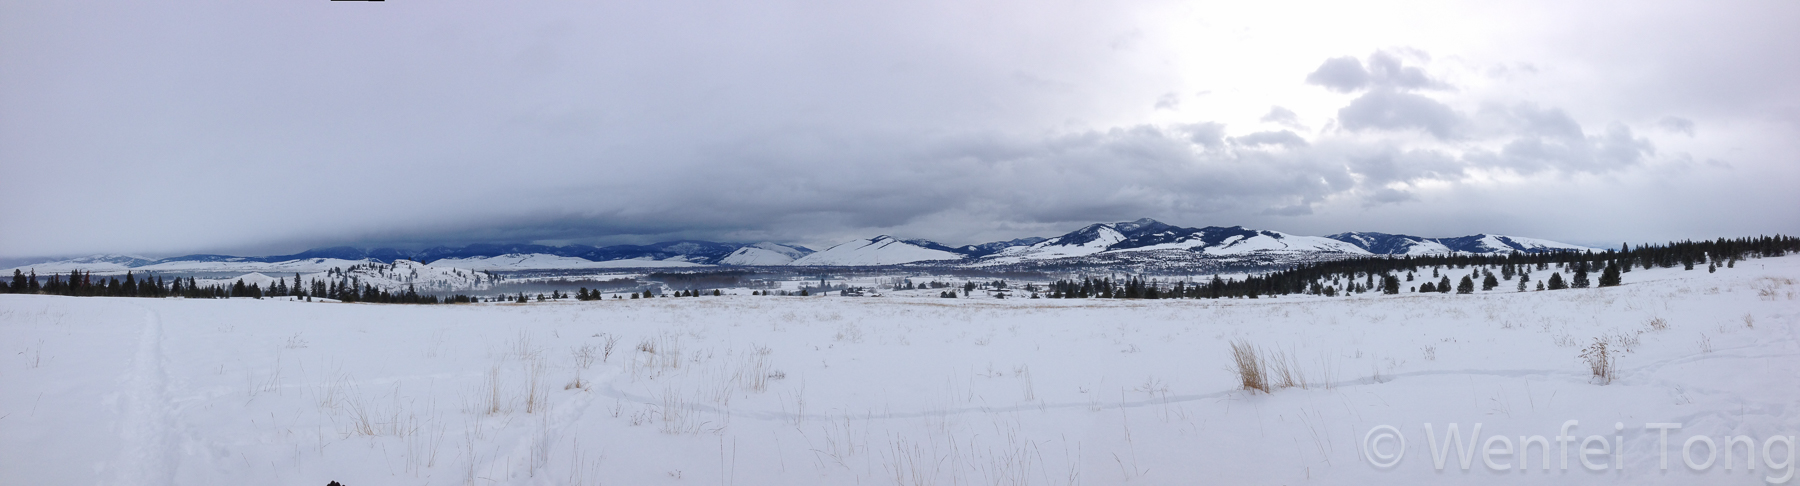 Cross-country skiing in Missoula